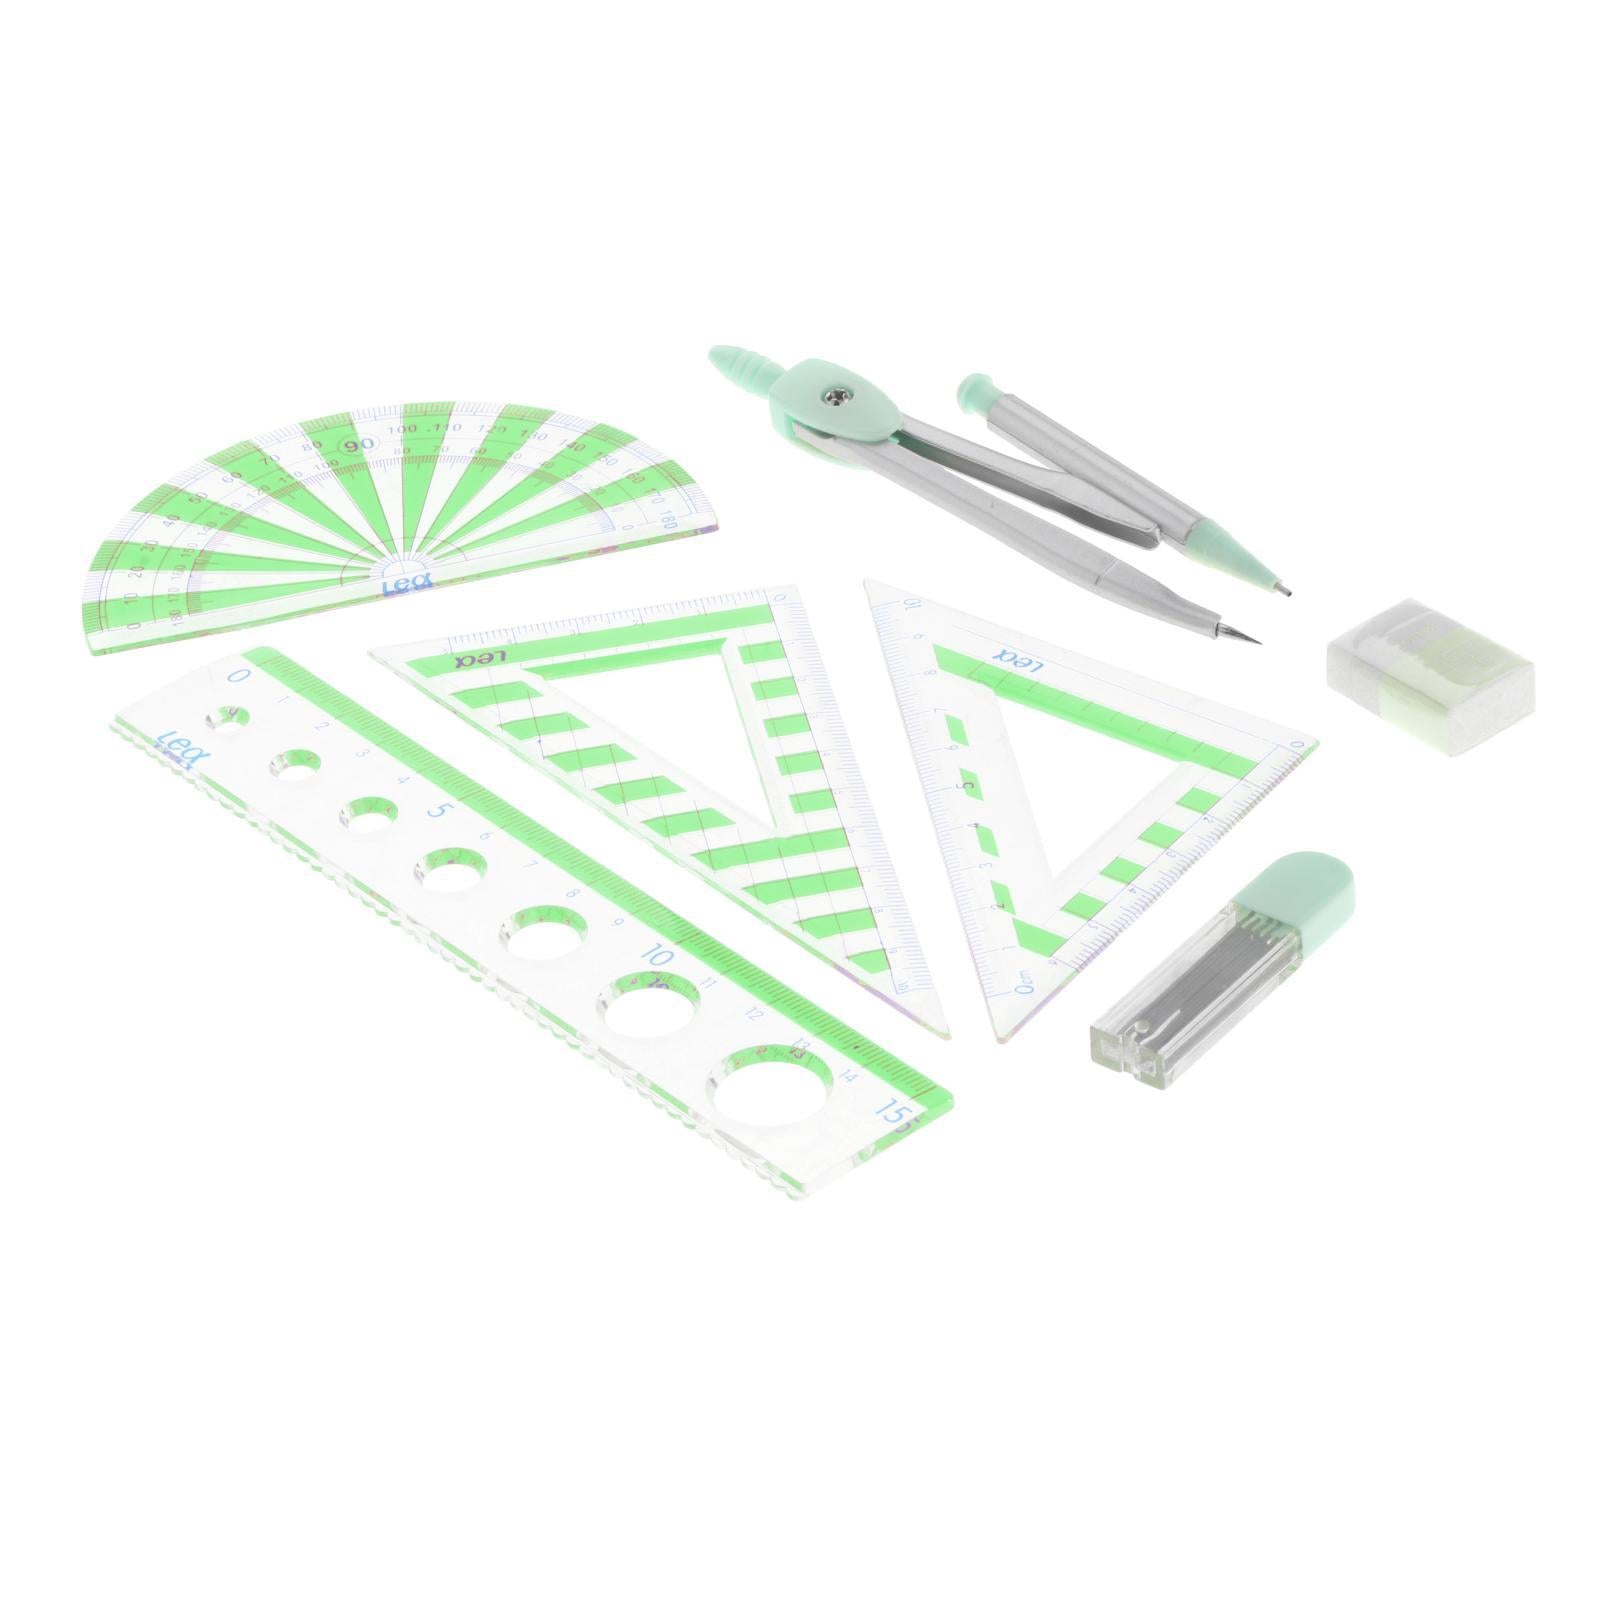 7x Mathematical Geometry Drawing Tool Student Stationery Rulers Gifts  Green